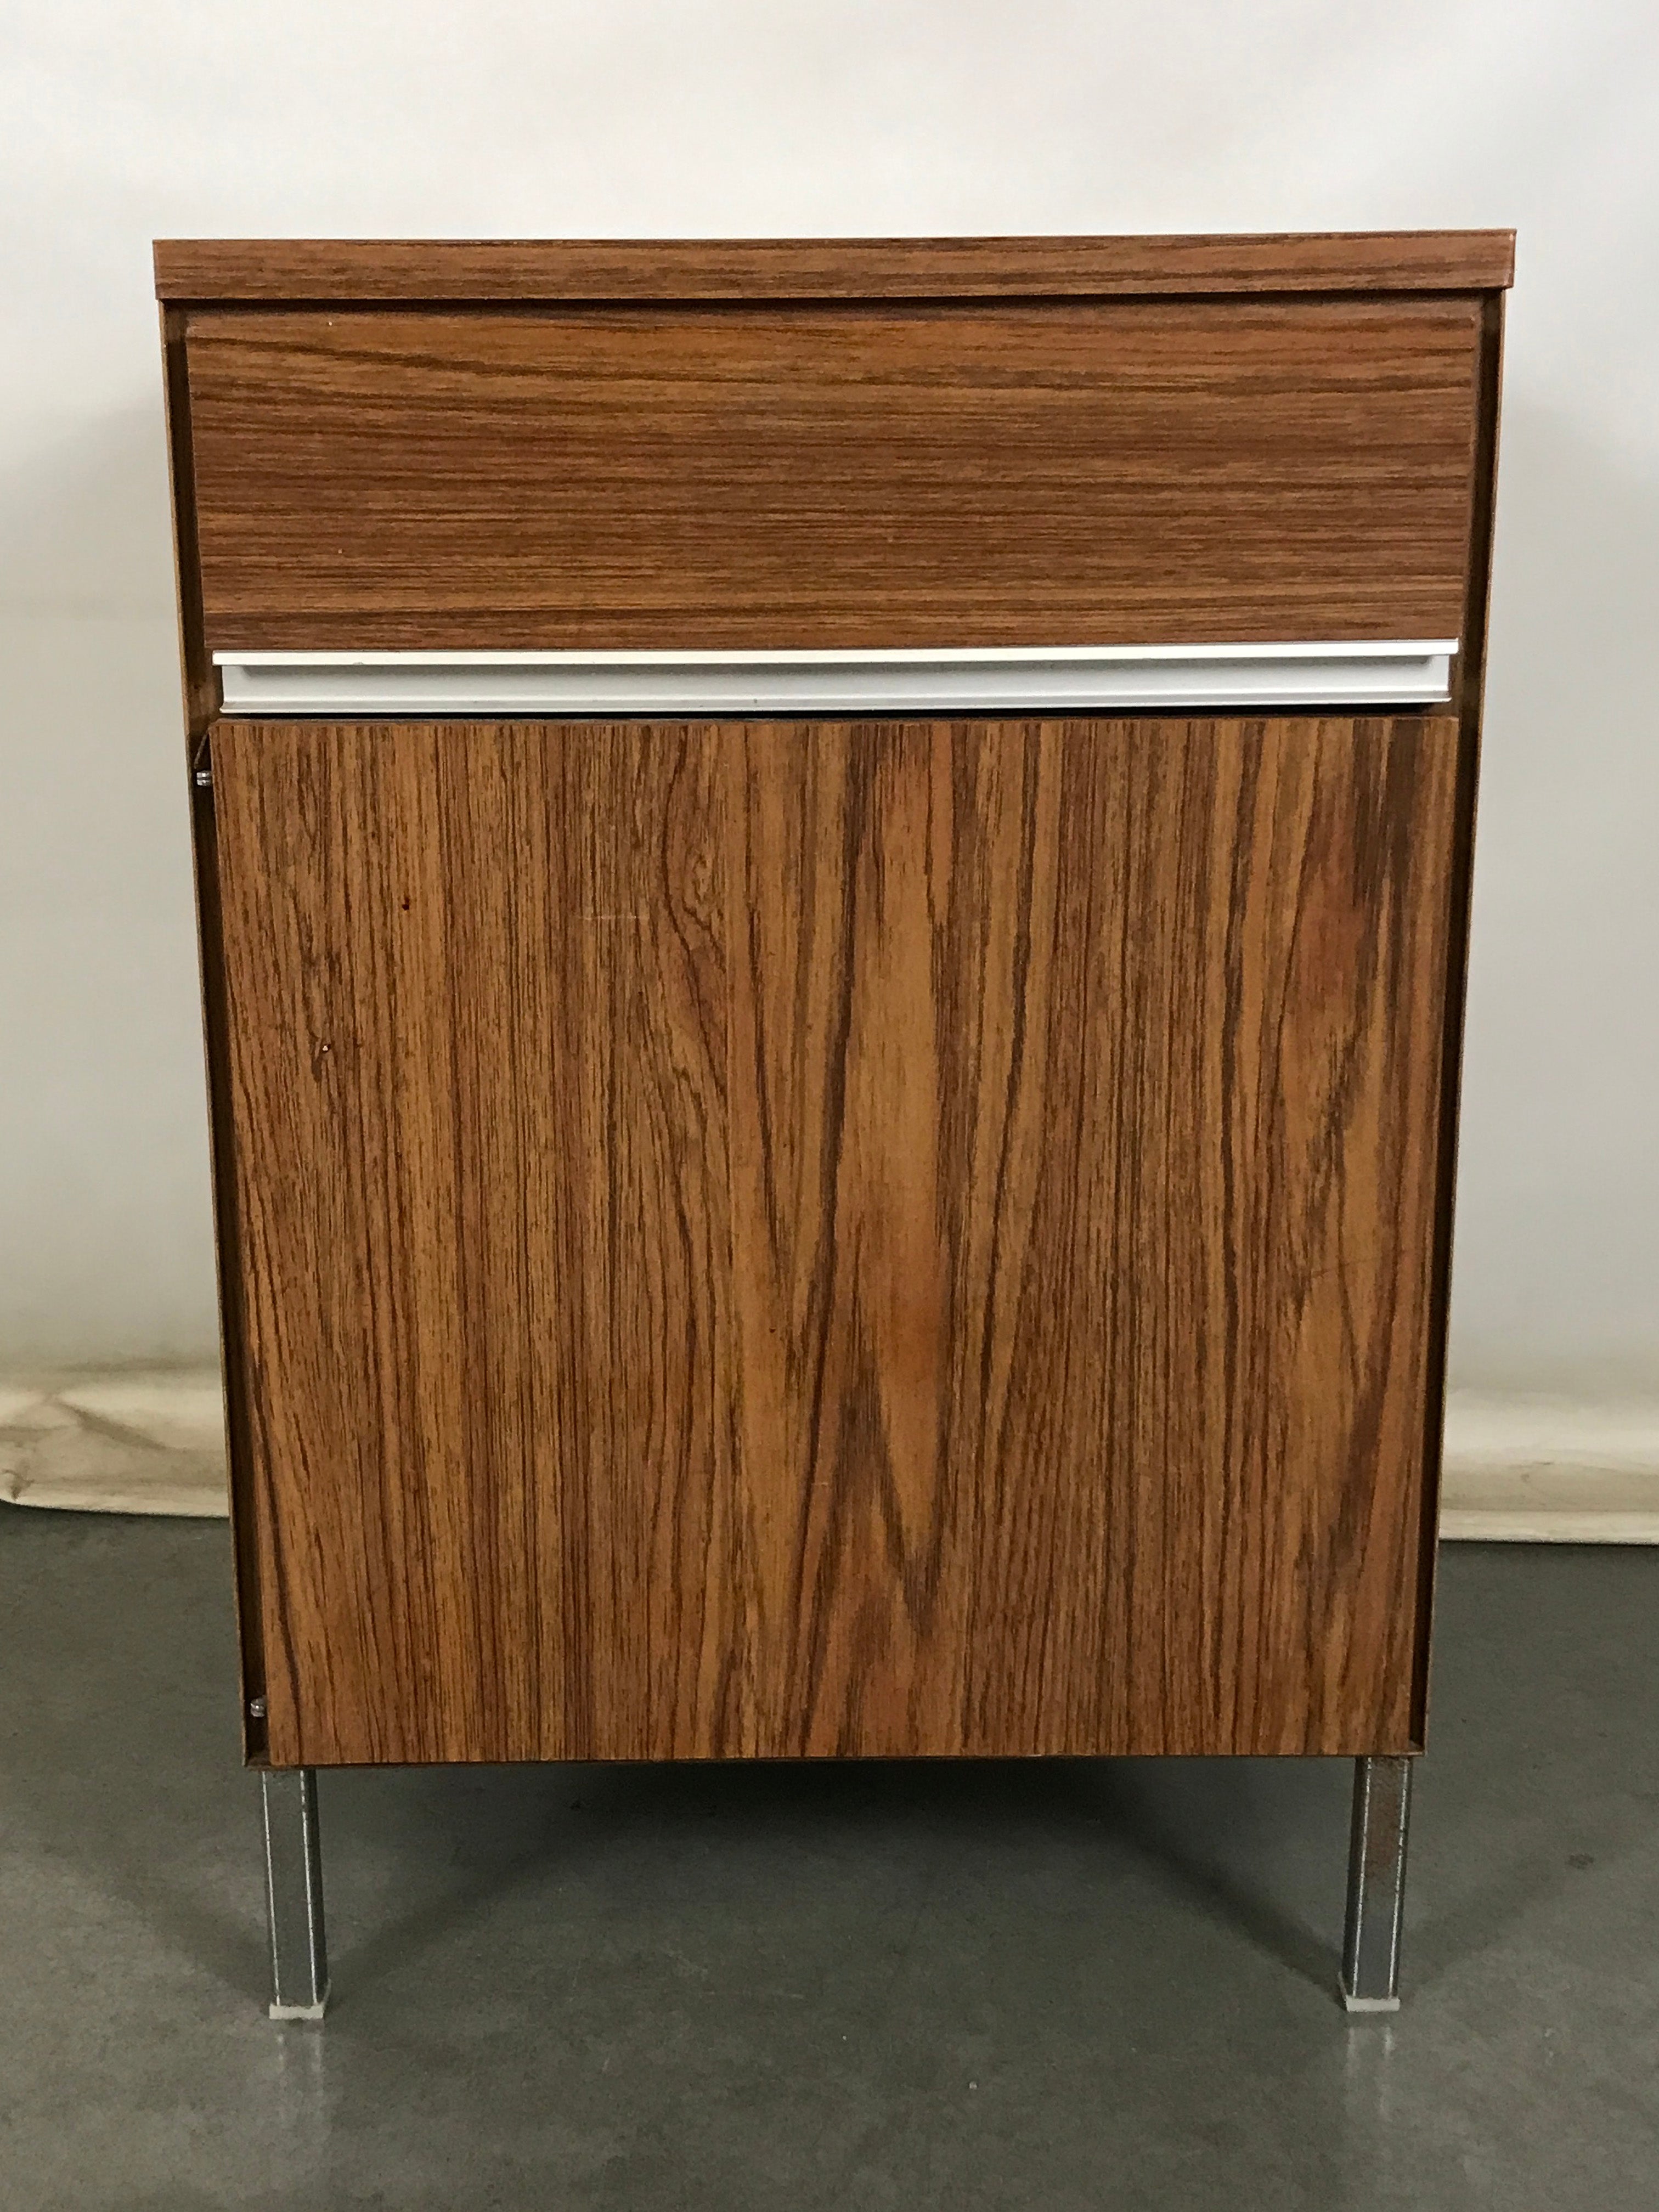 PACE Wooden Cabinet With Metal Frame